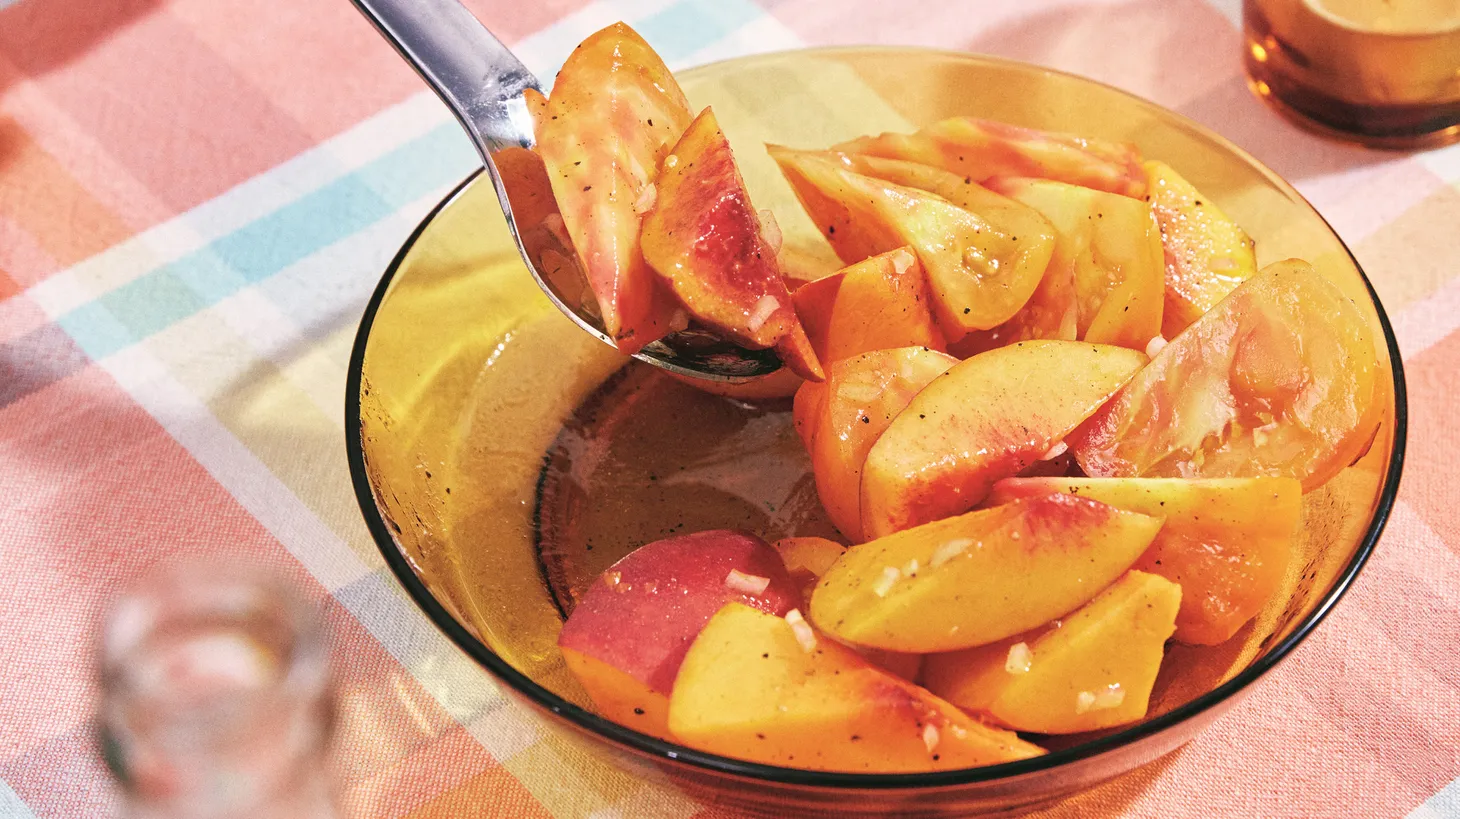 A tomato and stone fruit salad celebrates the sweetness of summer and gets a hint of bitterness from orange marmalade, turmeric, and a shallot vinaigrette.